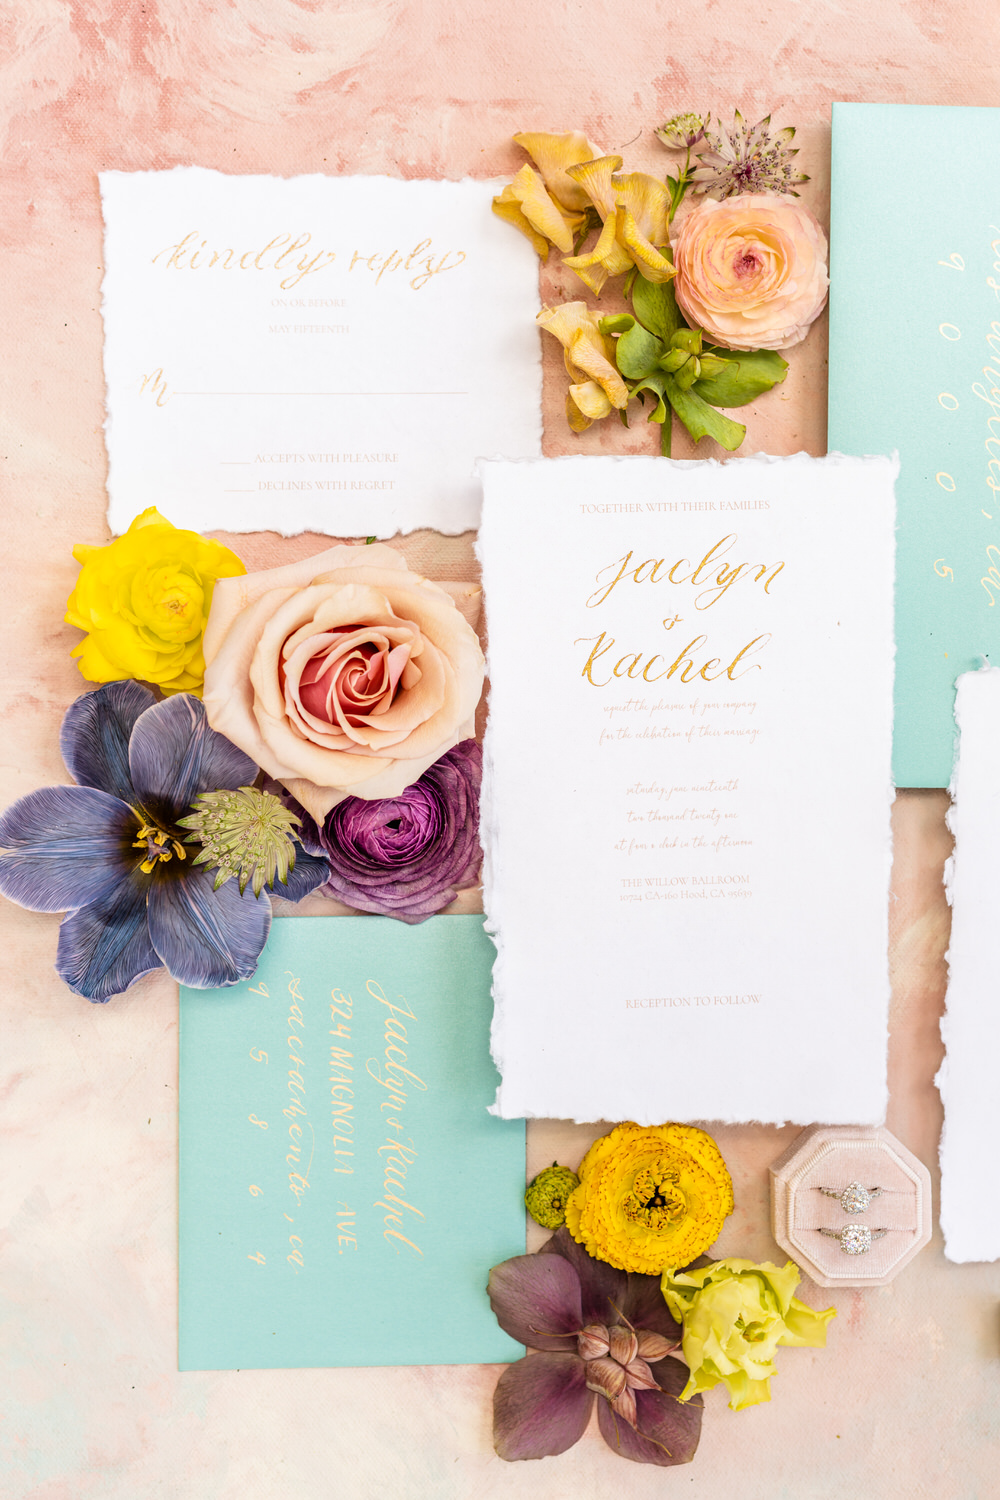 A Pride Inspired Wedding With A Romantic Ombre Rainbow Twist ⋆ Ruffled